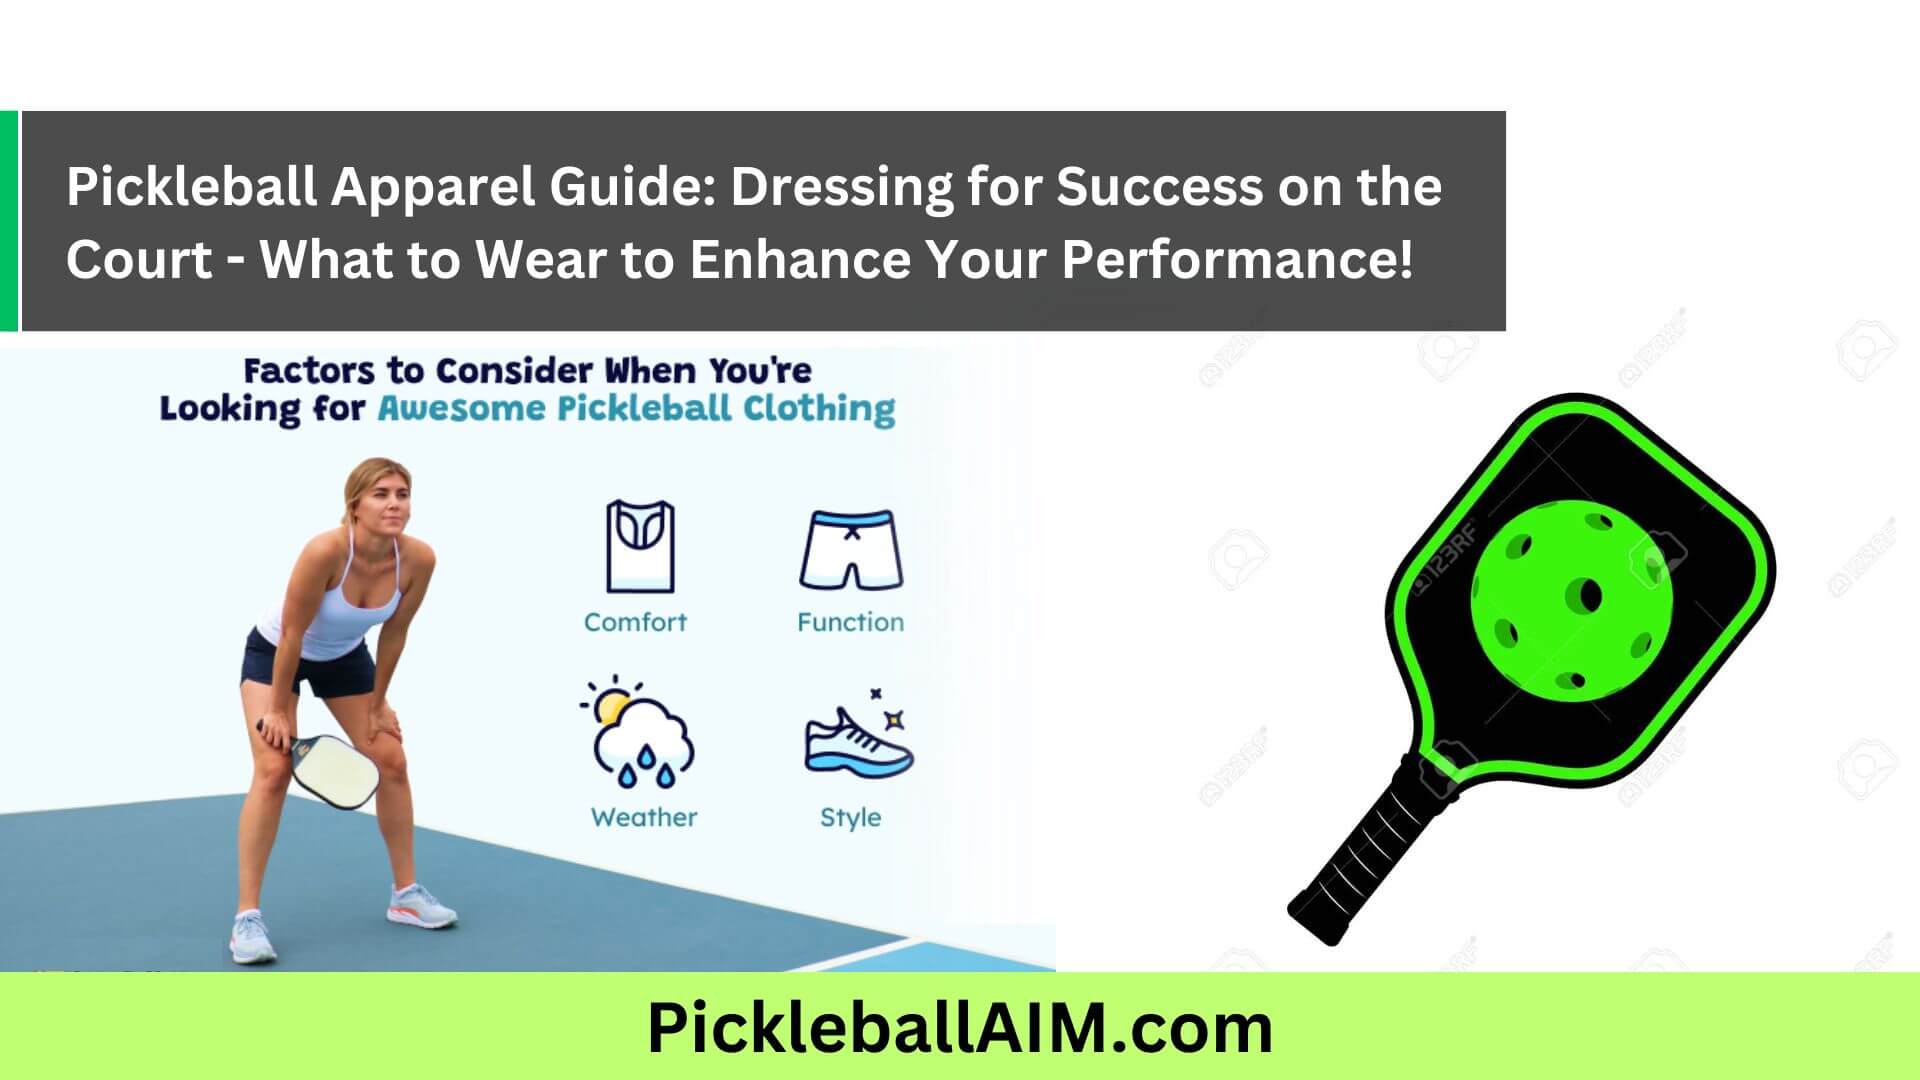 Pickleball Apparel Guide Dressing for Success on the Court - What to Wear to Enhance Your Performance!